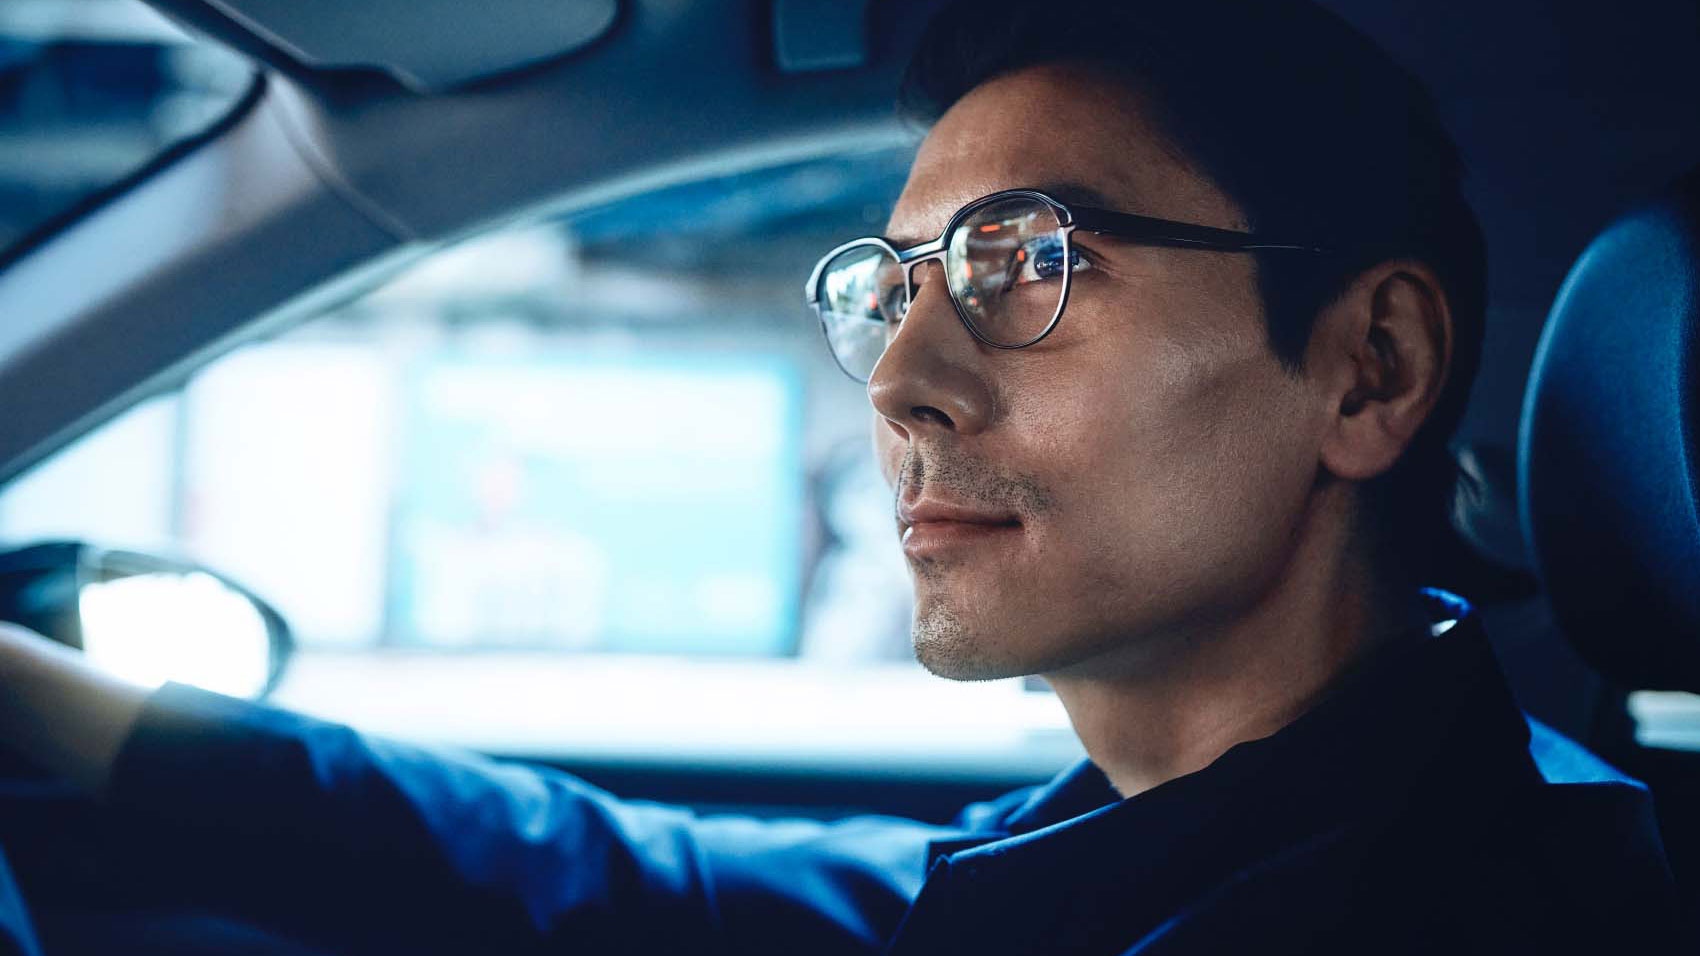 The best glasses for driving – reach your destination safely